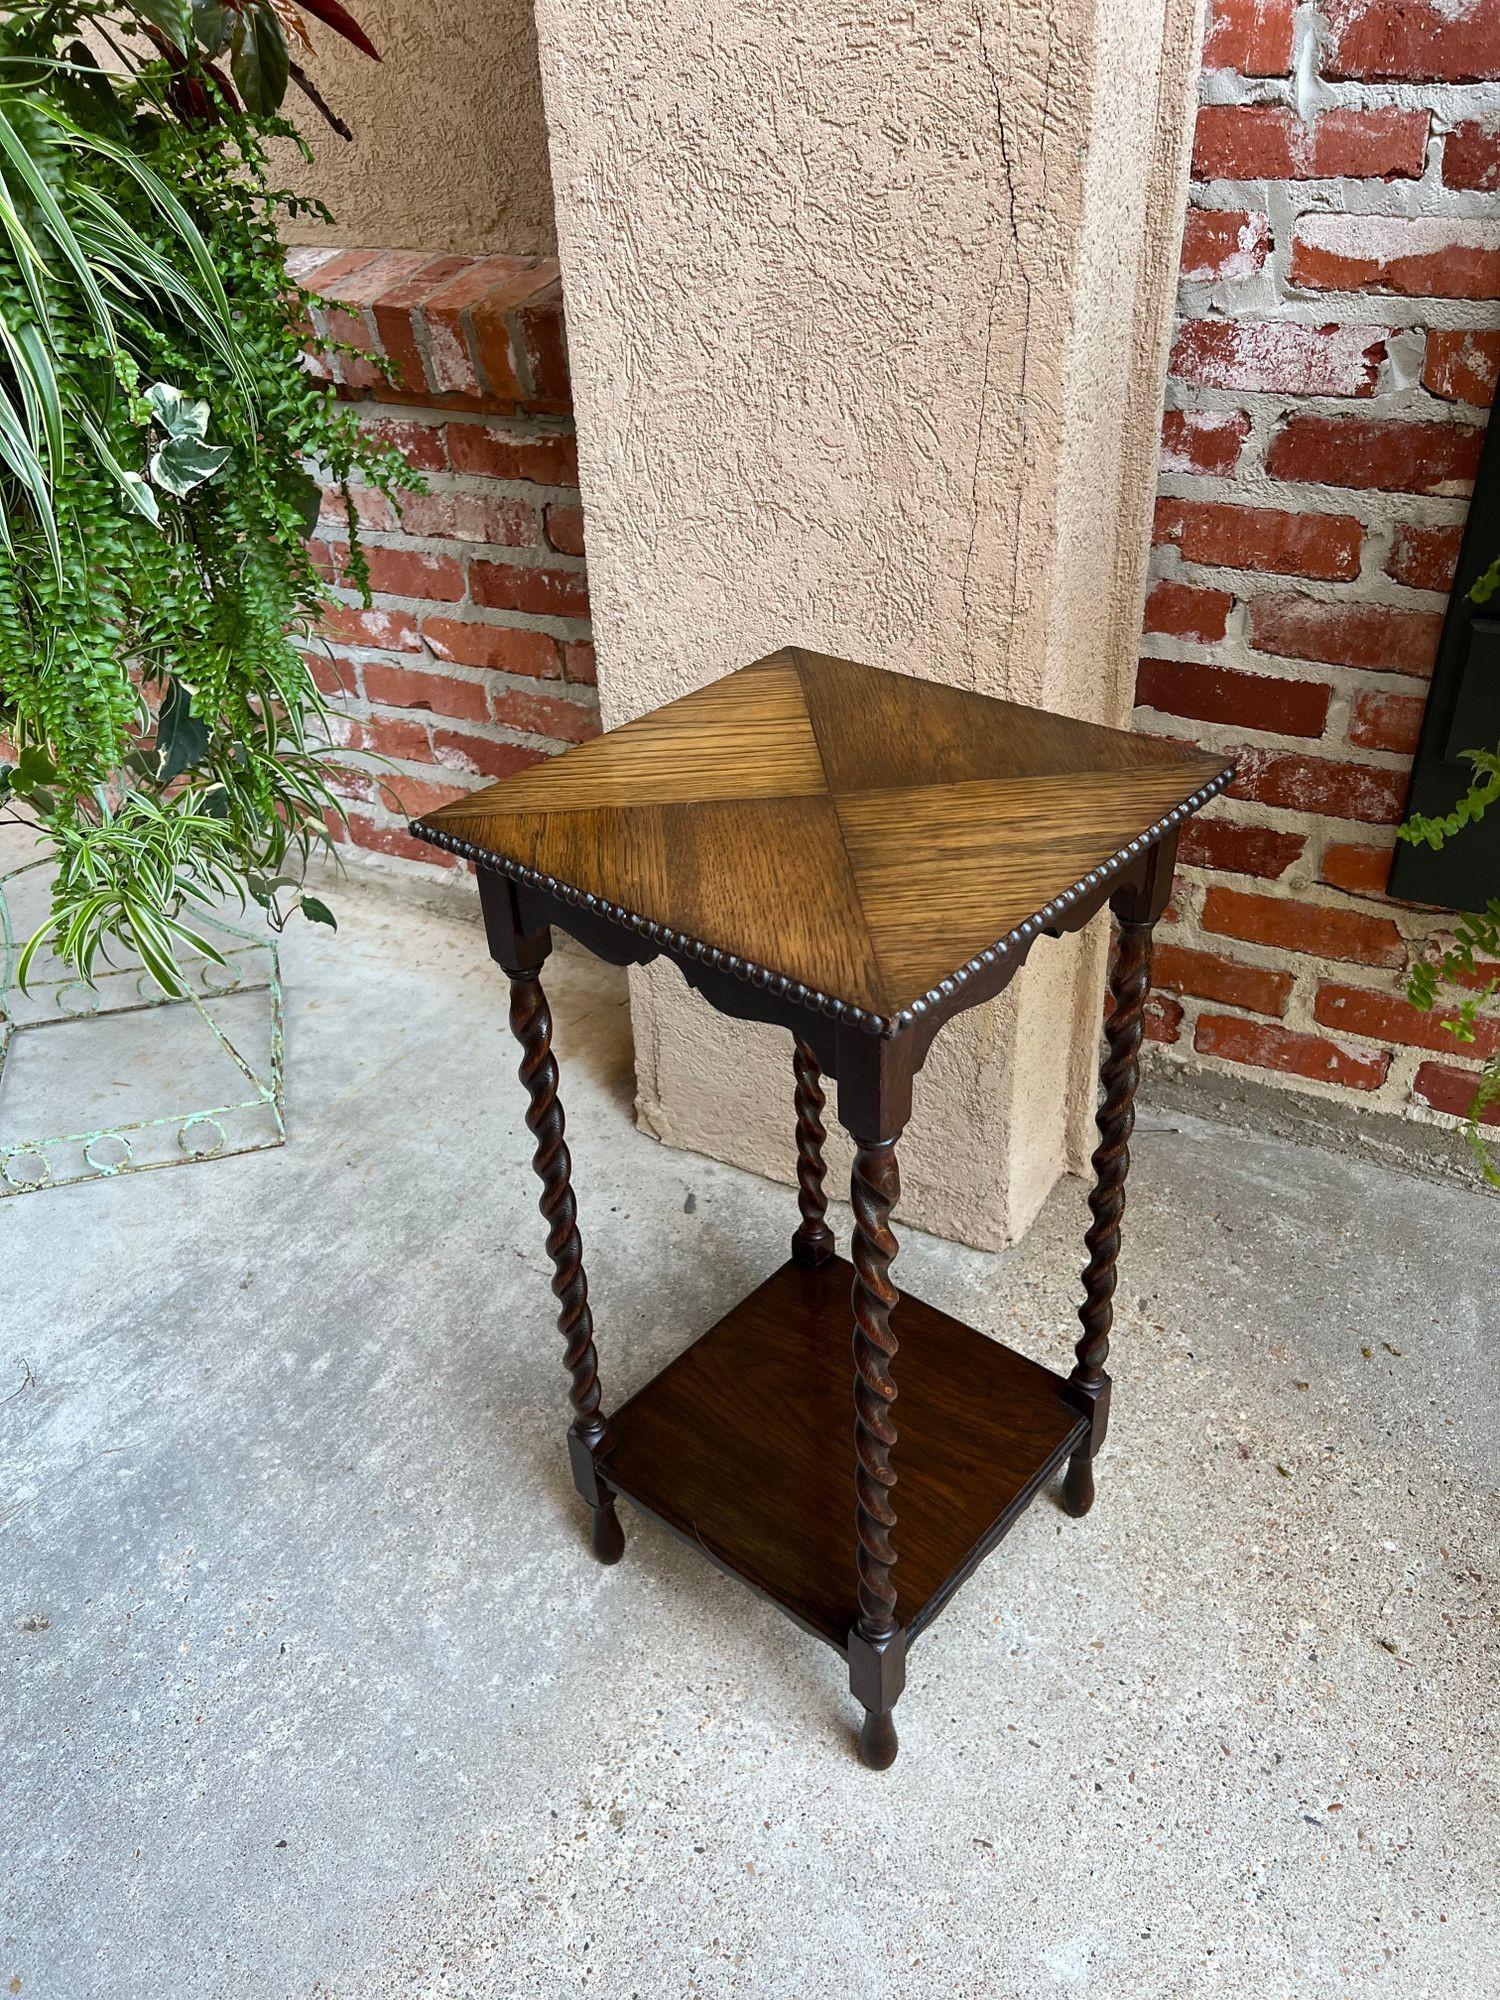 Antique English Barley Twist Square Side Table Petite Two Tier Oak c1910.
 
Direct from England, with classic British style, a lovely antique English oak side or sofa table.  Very petite size, with beaded edges to the parquet top. Scalloped apron